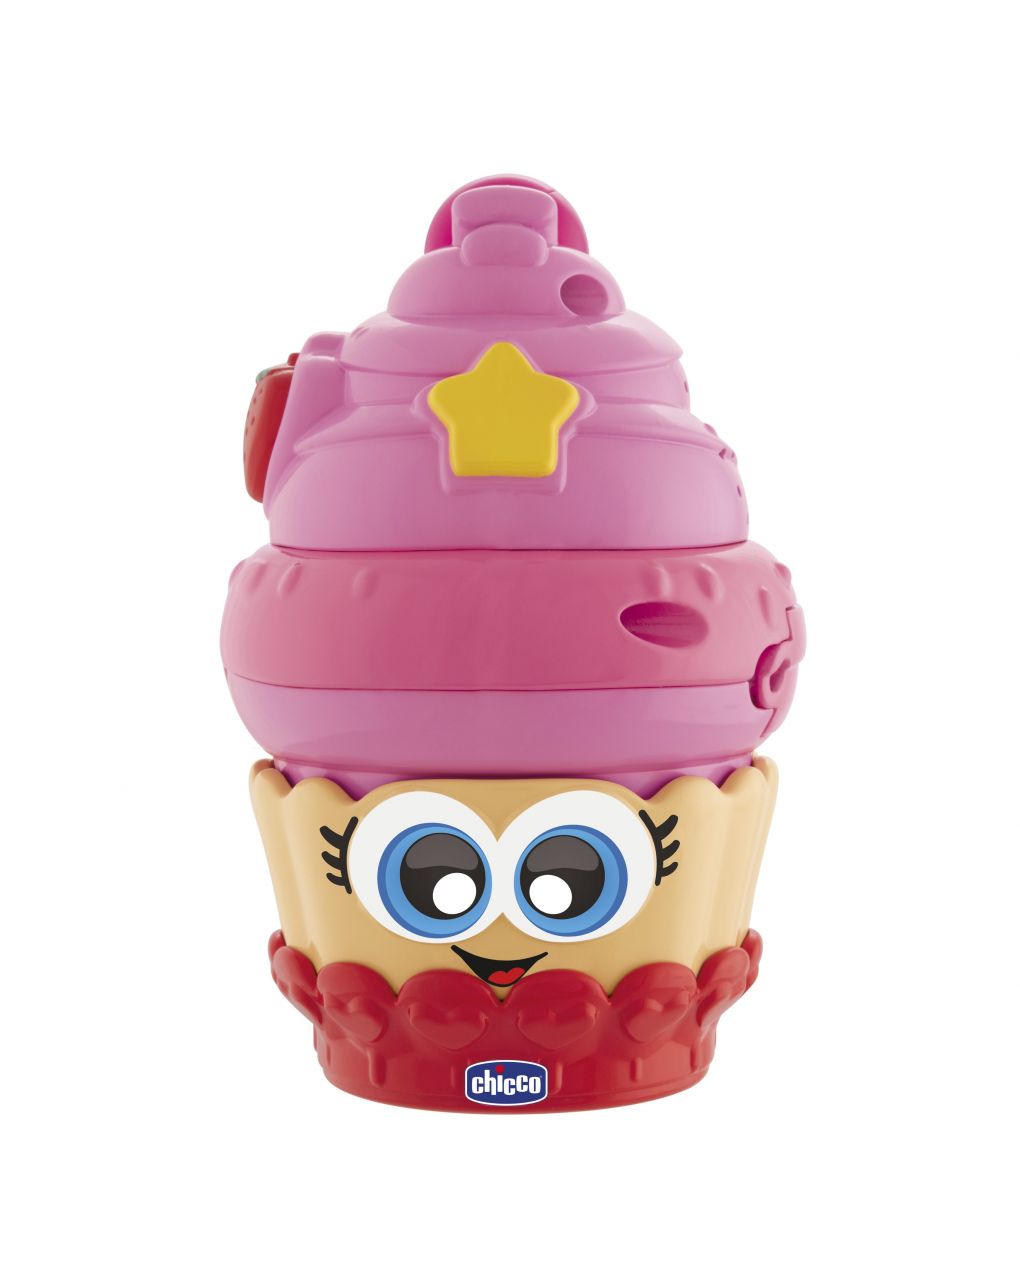 Chicco candy passione cupcake - Chicco